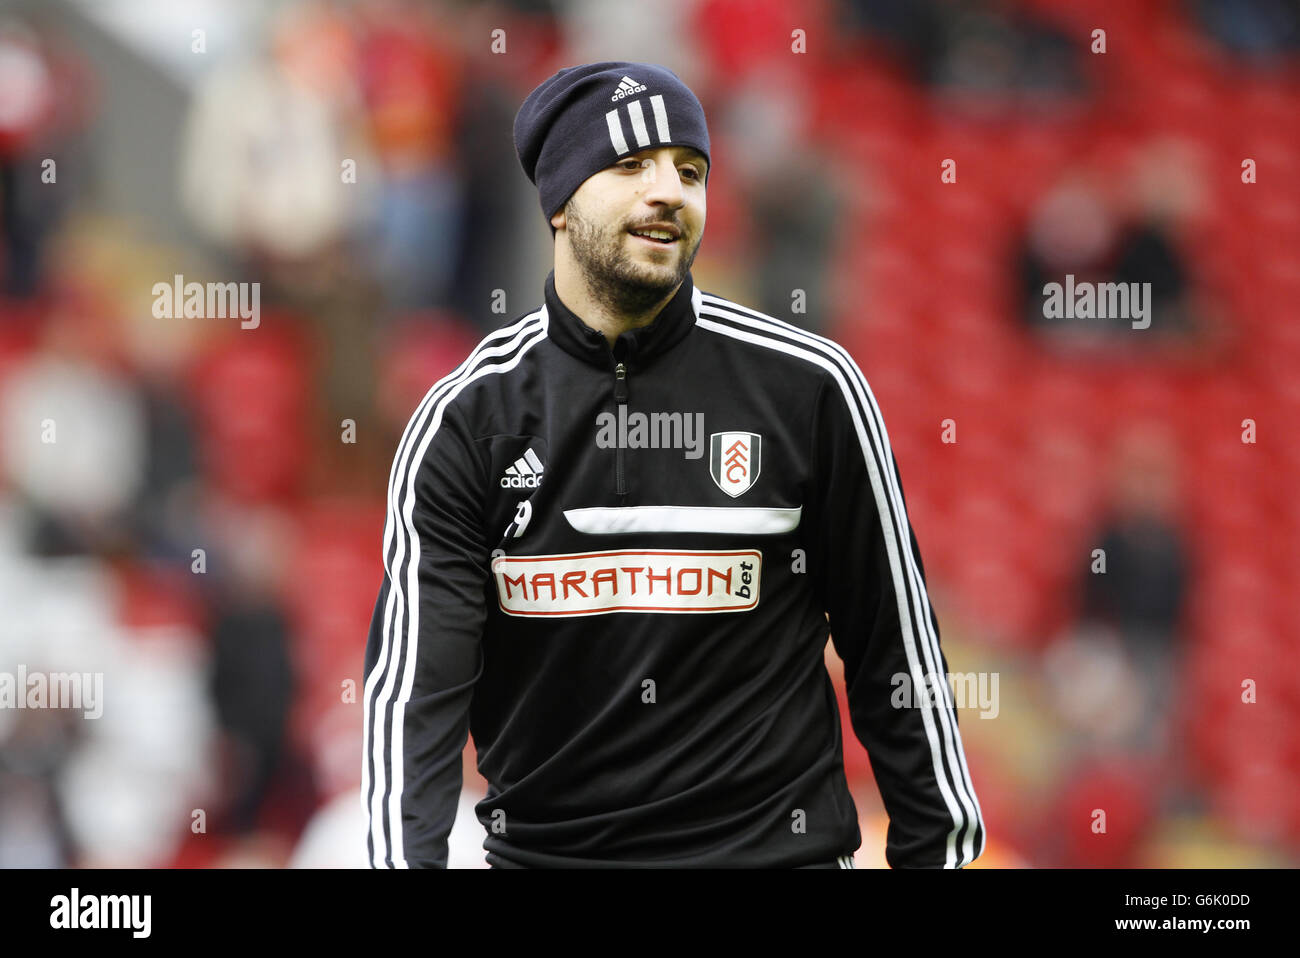 Football - Barclays Premier League - Liverpool / Fulham - Anfield. Adel Taarabt, Fulham Banque D'Images